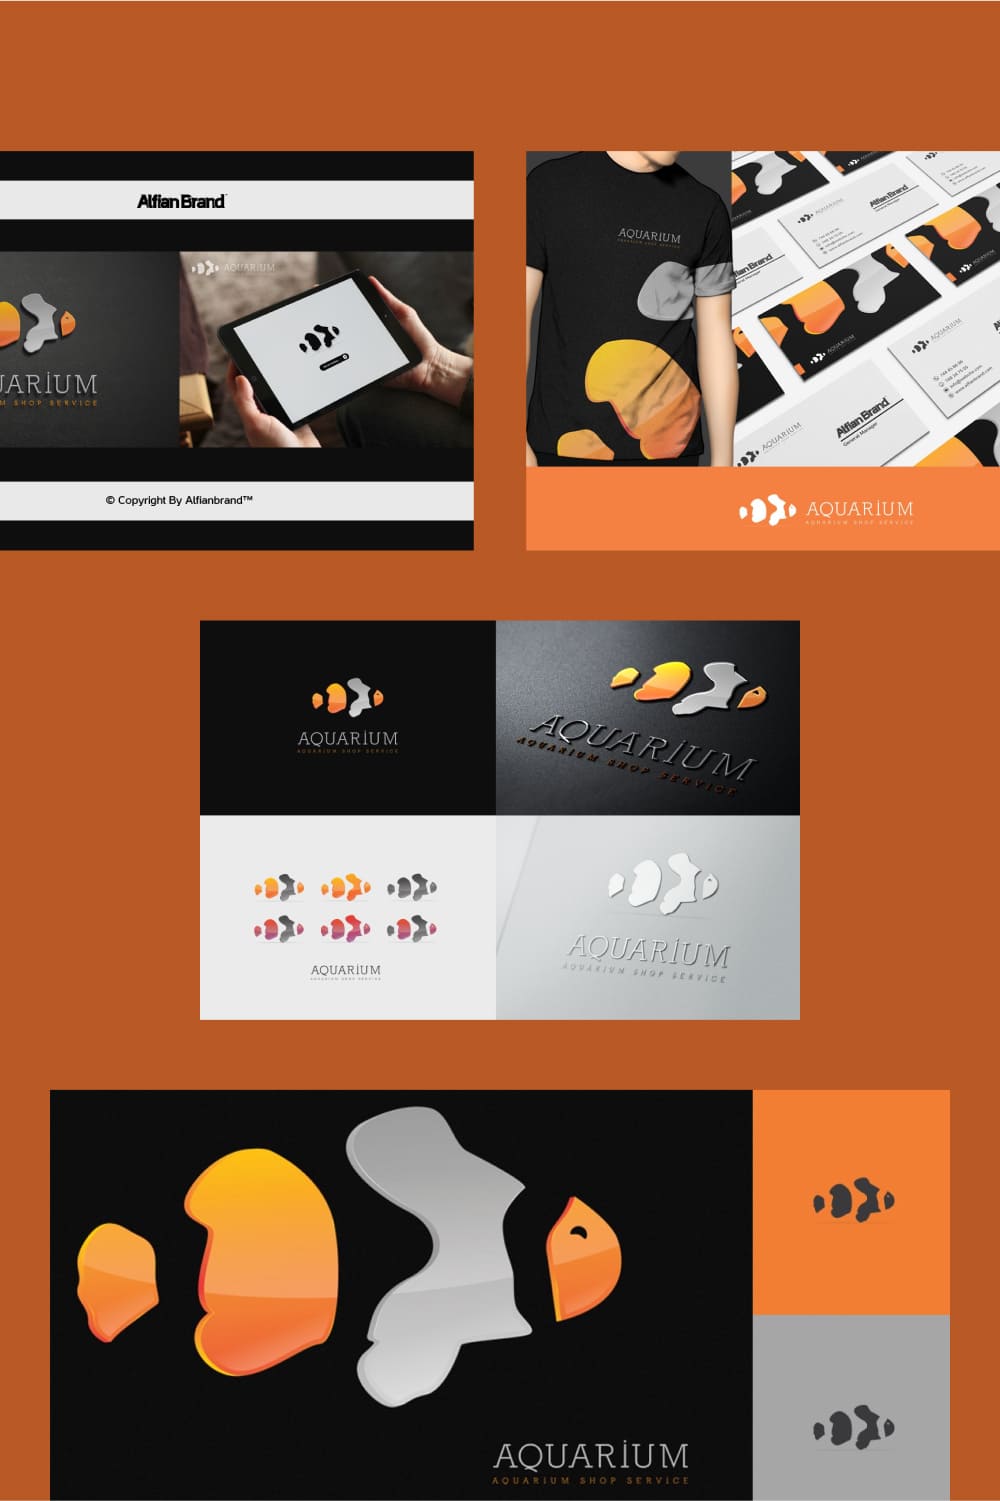 Simple logos with colorful design.